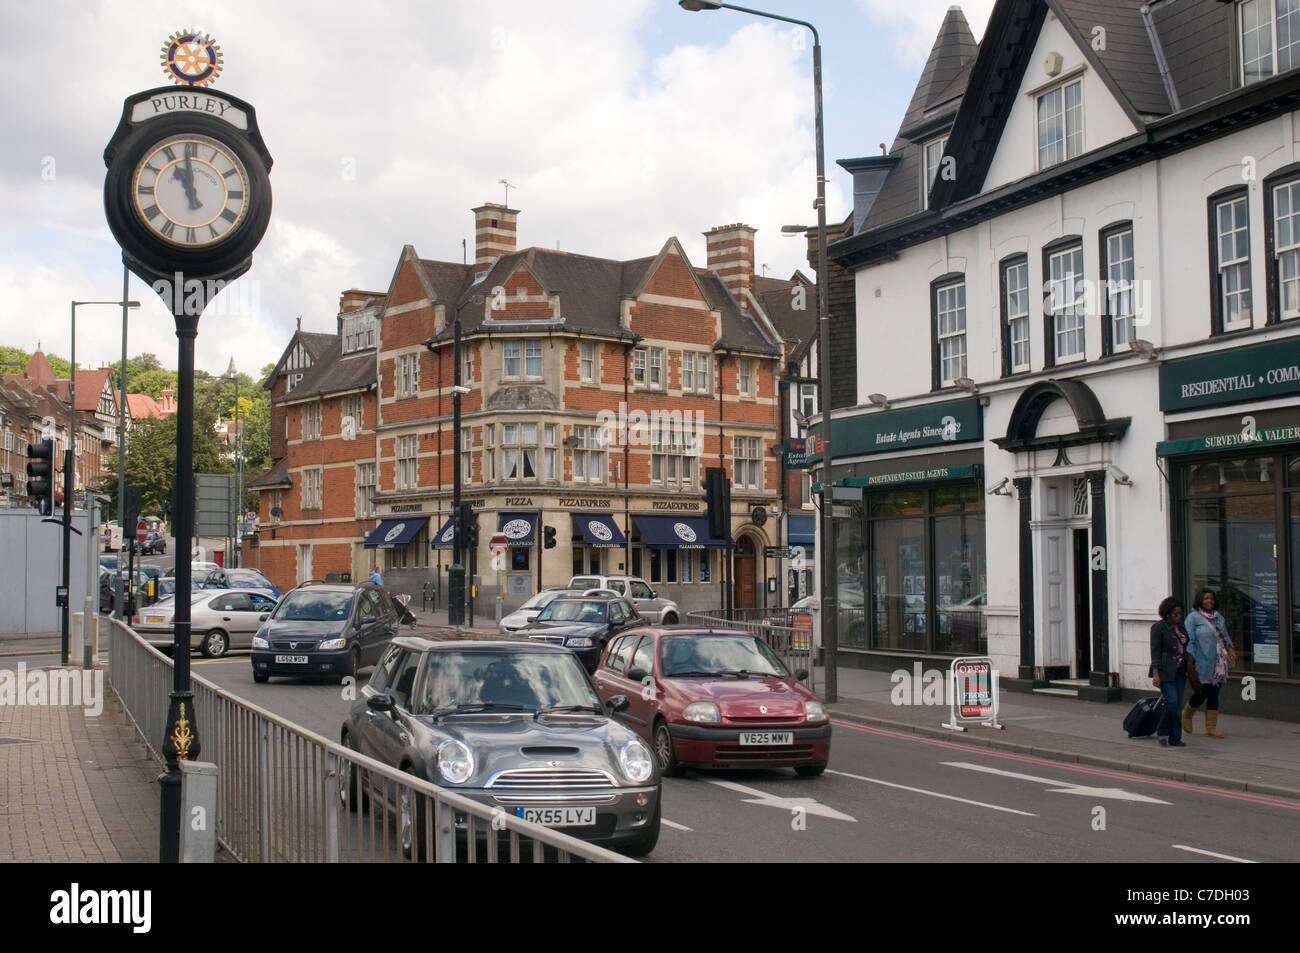 purley high street highstreet surrey south london terry and june Stock Photo